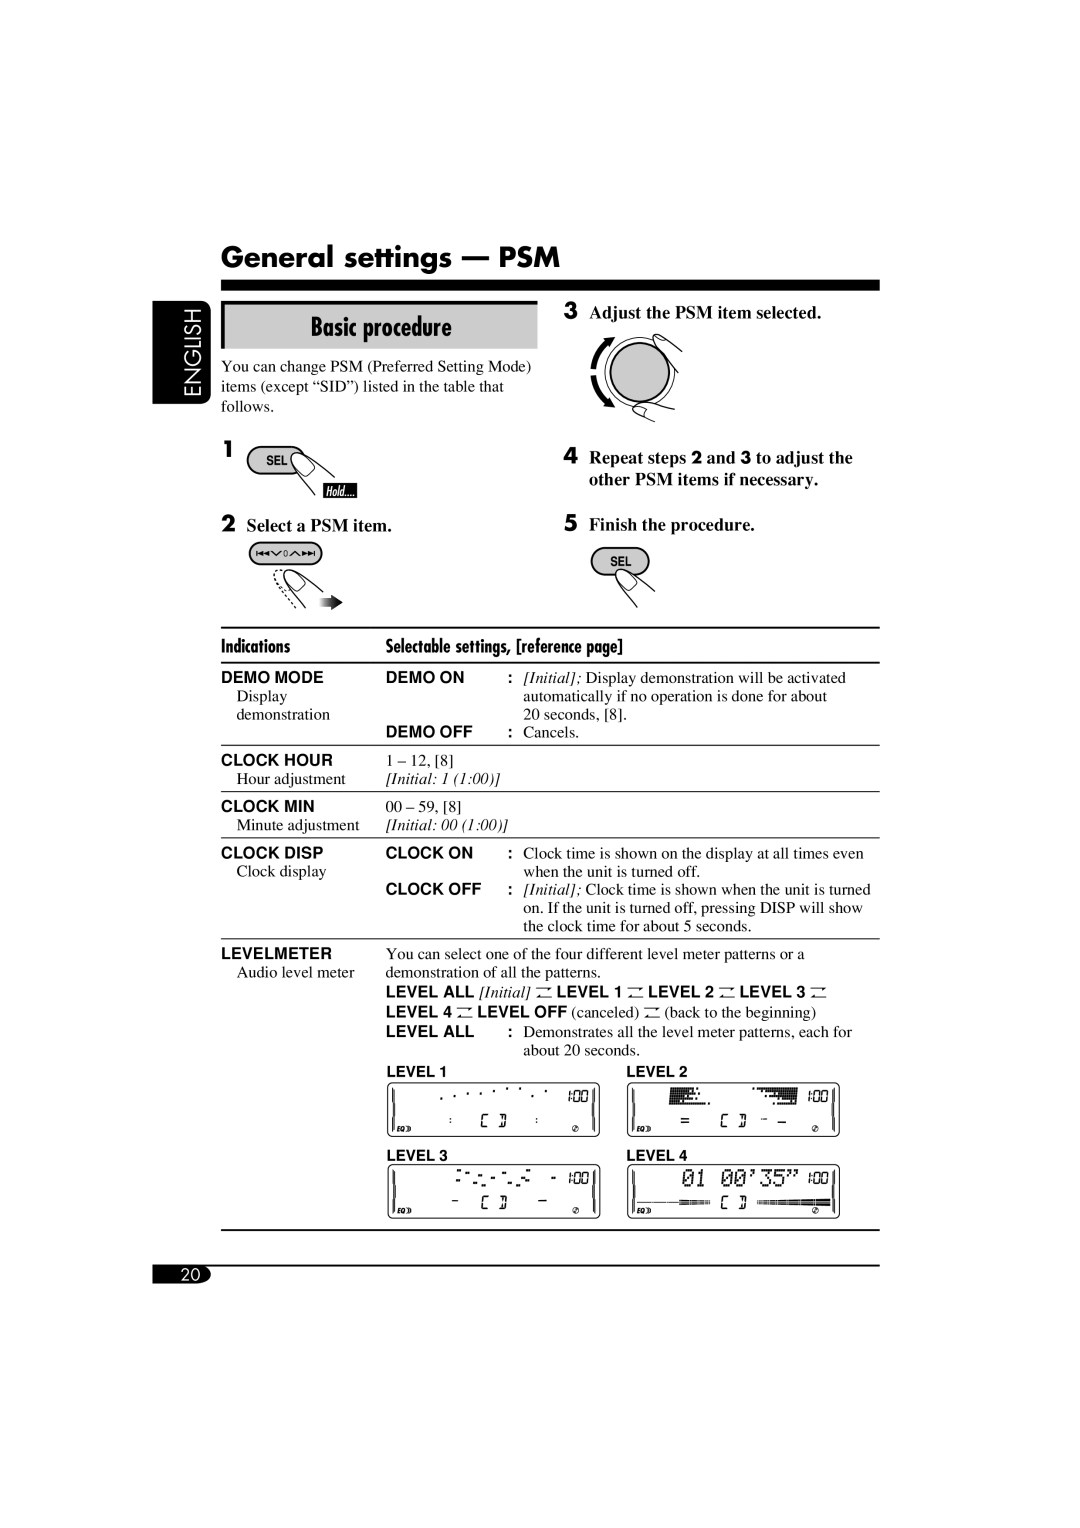 JVC KW-XC410, KW-XC400 General settings - PSM, Basic procedure, English, 2Select a PSM item, 3Adjust the PSM item selected 